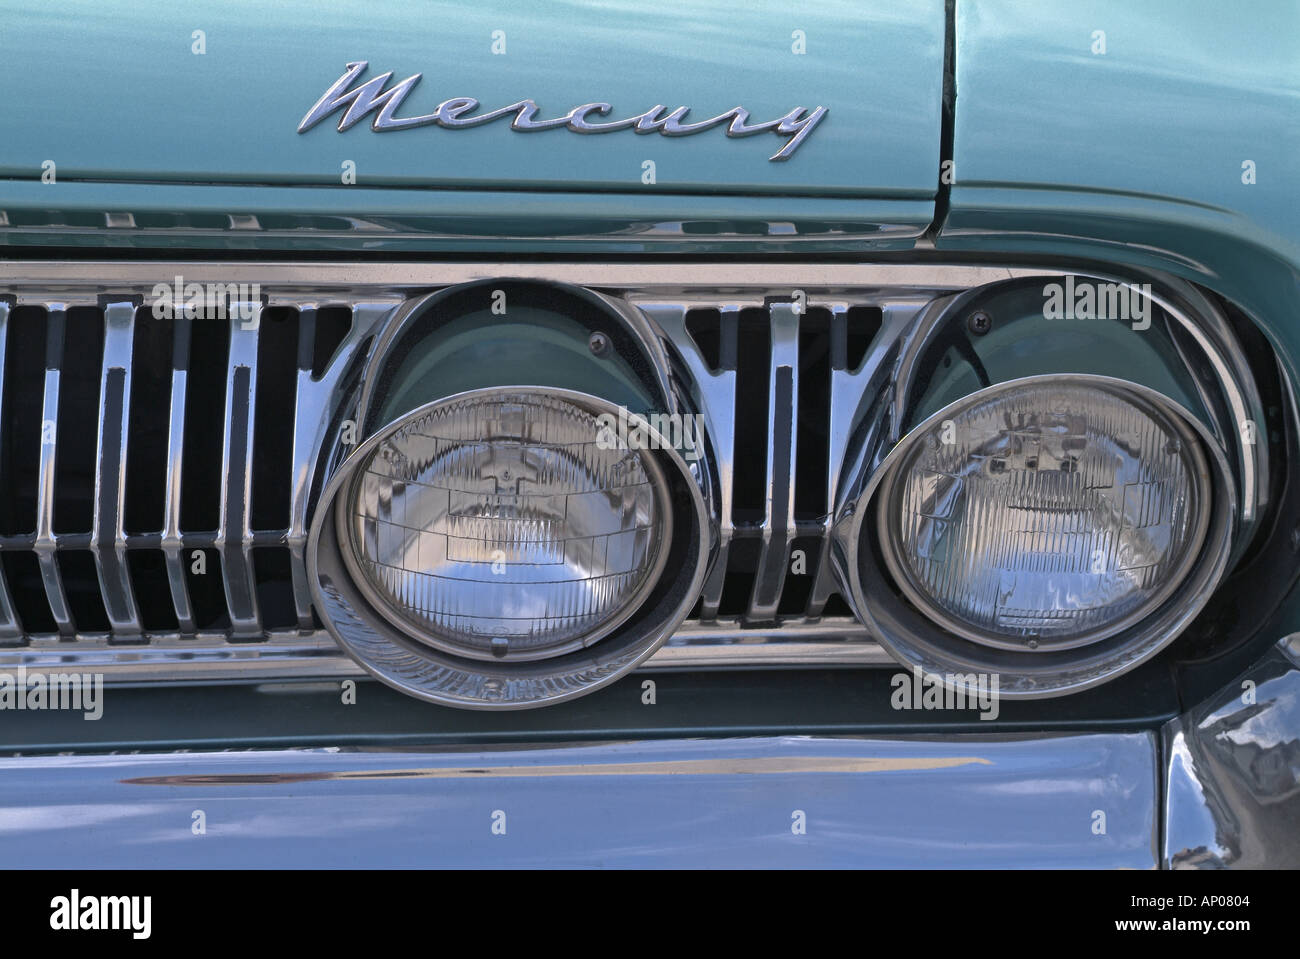 Vintage Automobile Ford 1964 Mercury Montclair Front View Grill and headlights Vancouver Island Canada Stock Photo